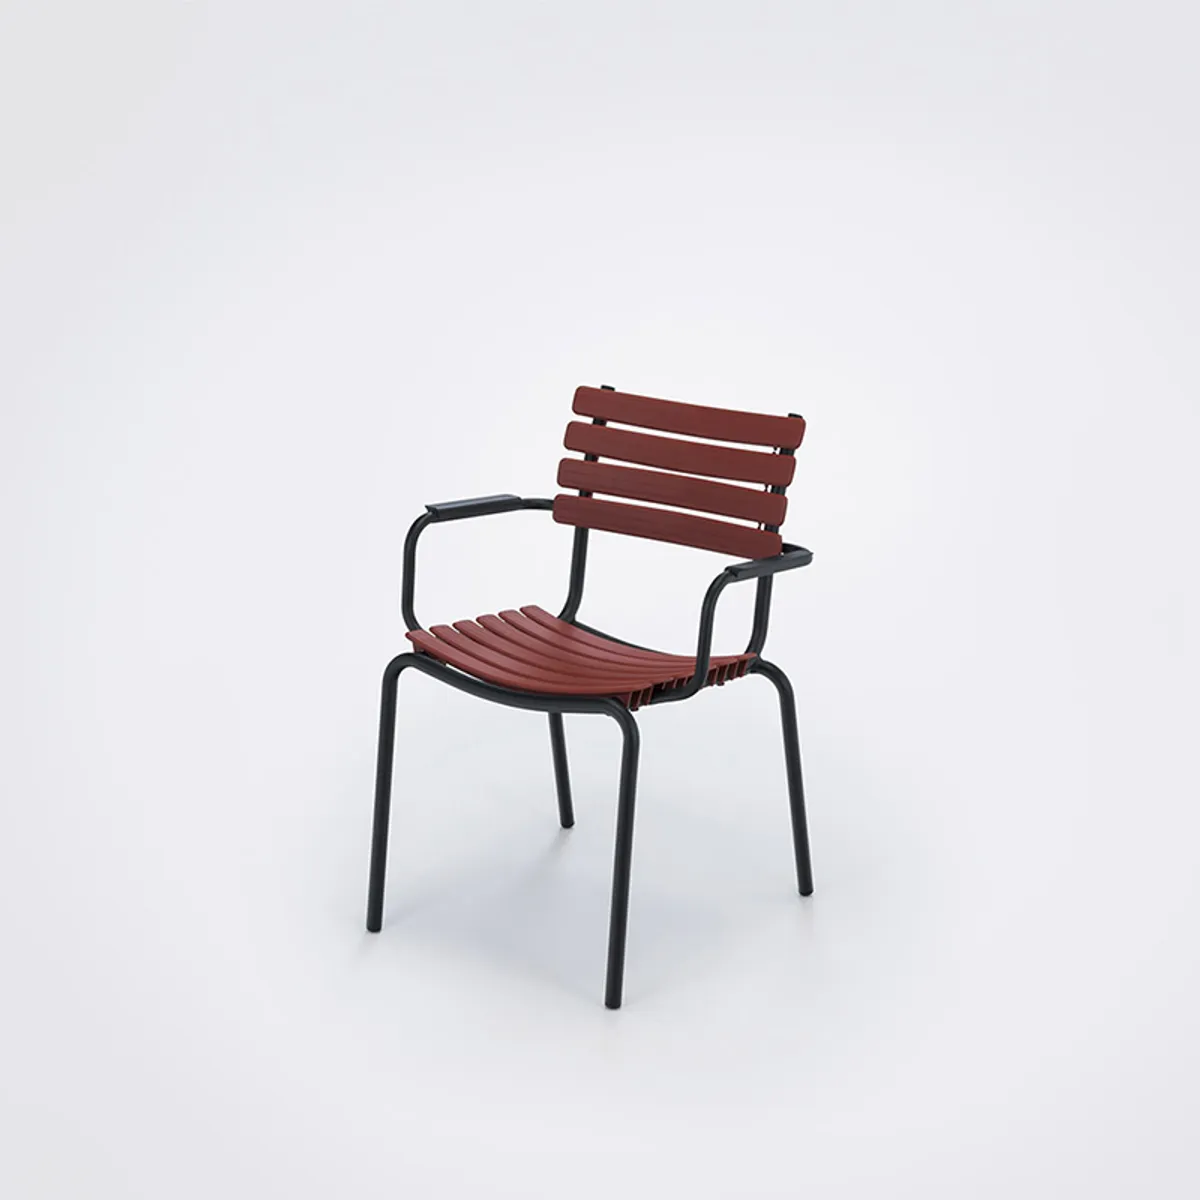 Snip Chair Metal And Plastic Outdoor Chair For Hotels And Cafe Gardens 341